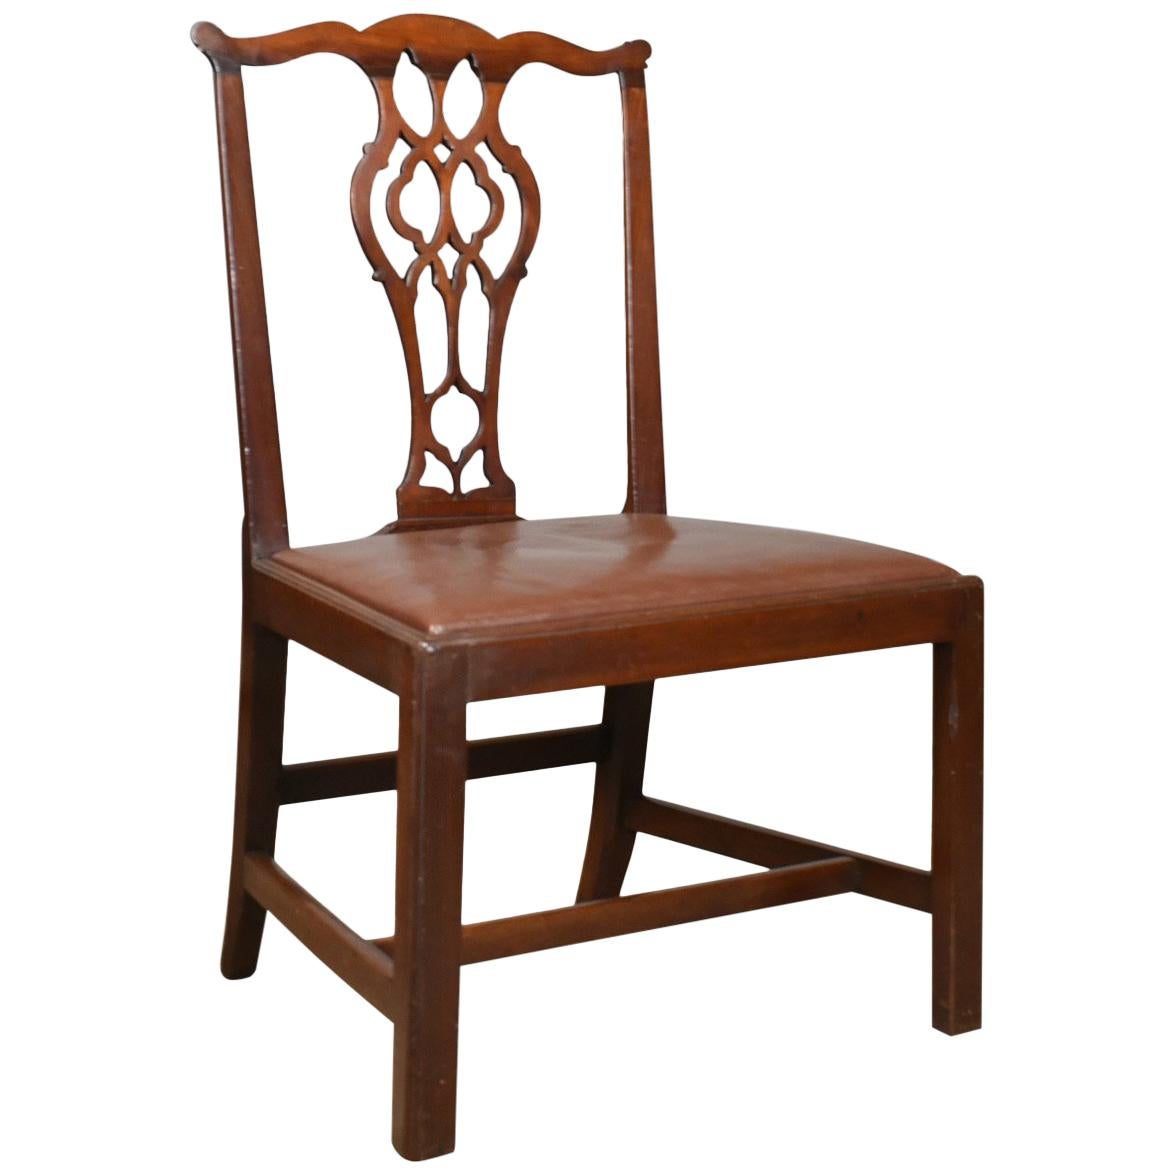 Set of Six Antique Dining Chairs, Mahogany, English, Georgian, Chippendale